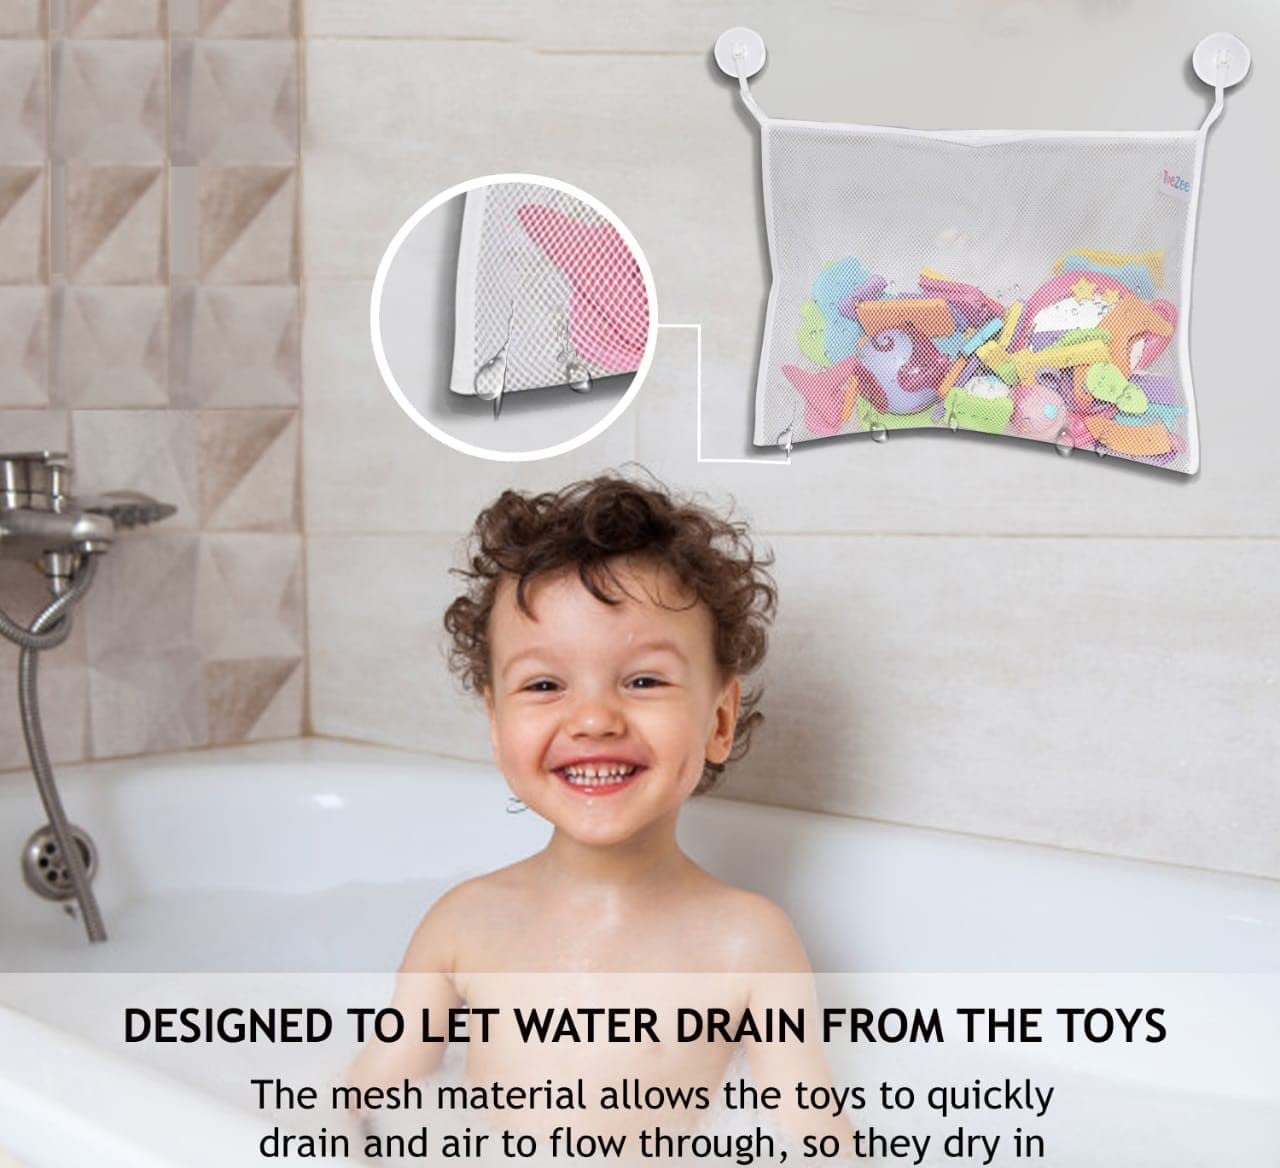 ToeZee Bath Toy Organizer Bag with Suction Cups | Mesh Toys Organizer Bag Keeps All of Your Toddlers Favorite Bath Toys in One Convenient Location | Bath Toys Bag Easily Sticks to The Wall